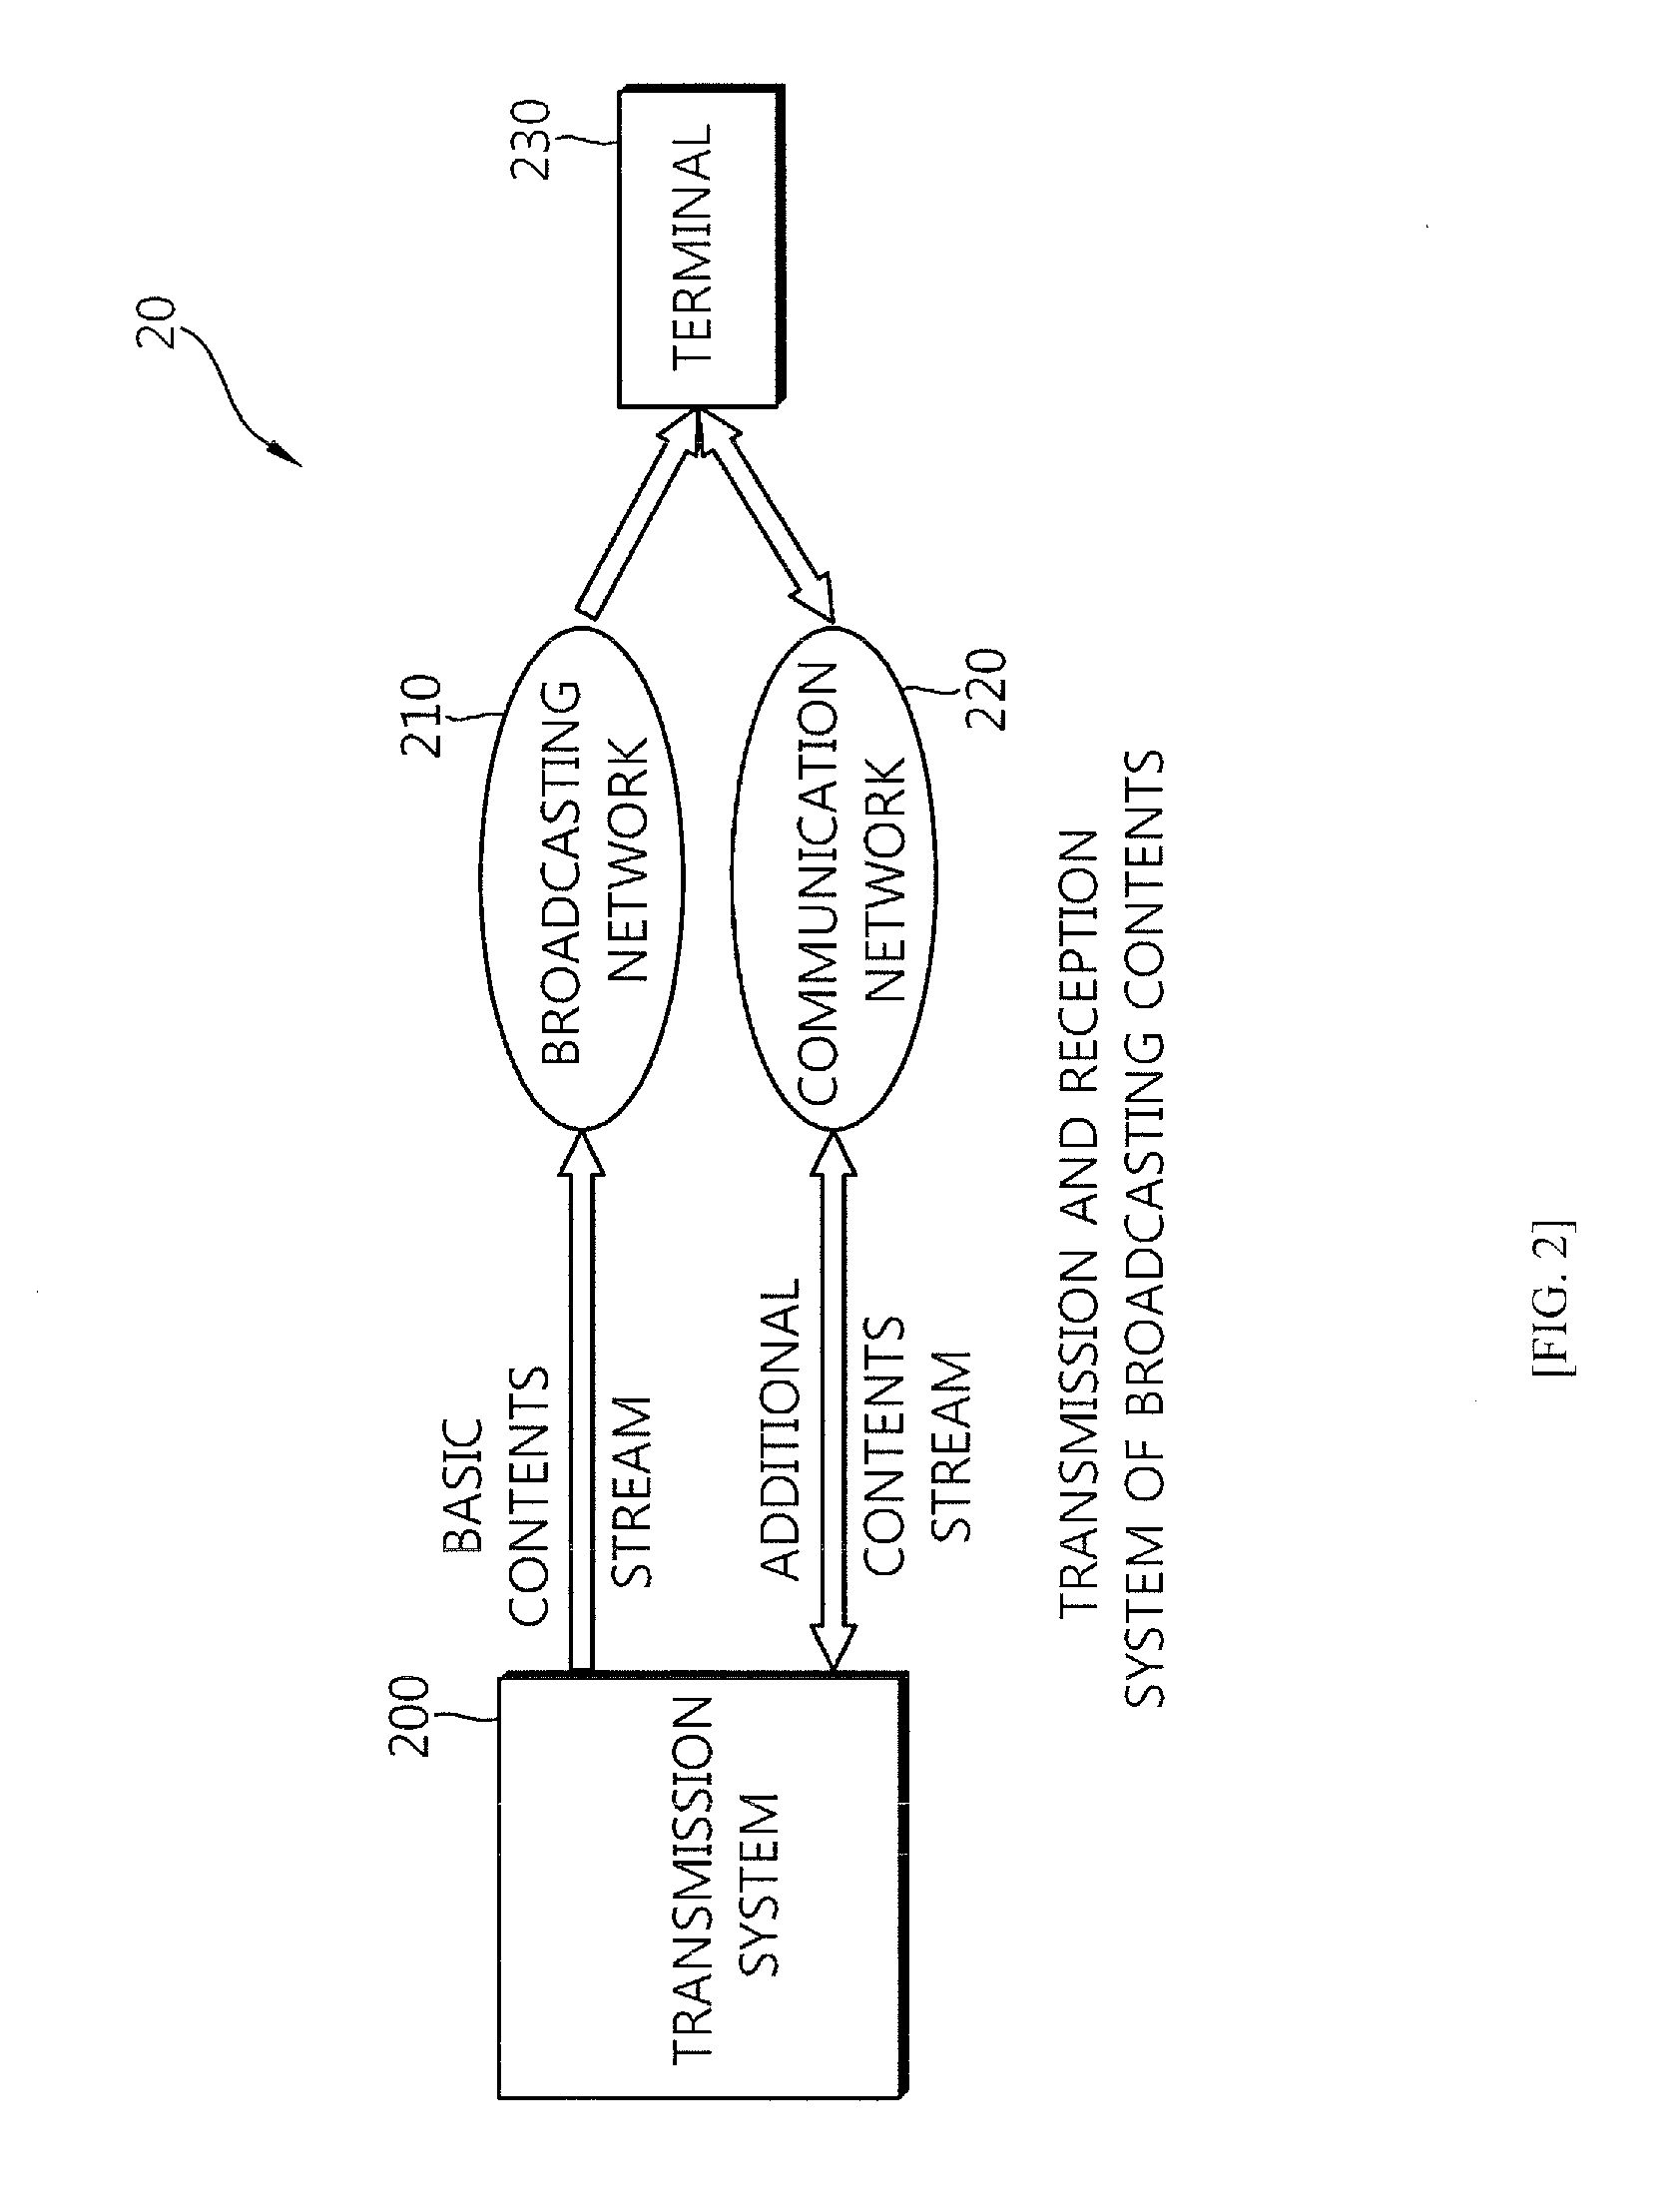 Apparatus and method of transmitting and receiving associated broadcasting contents based on heterogeneous network